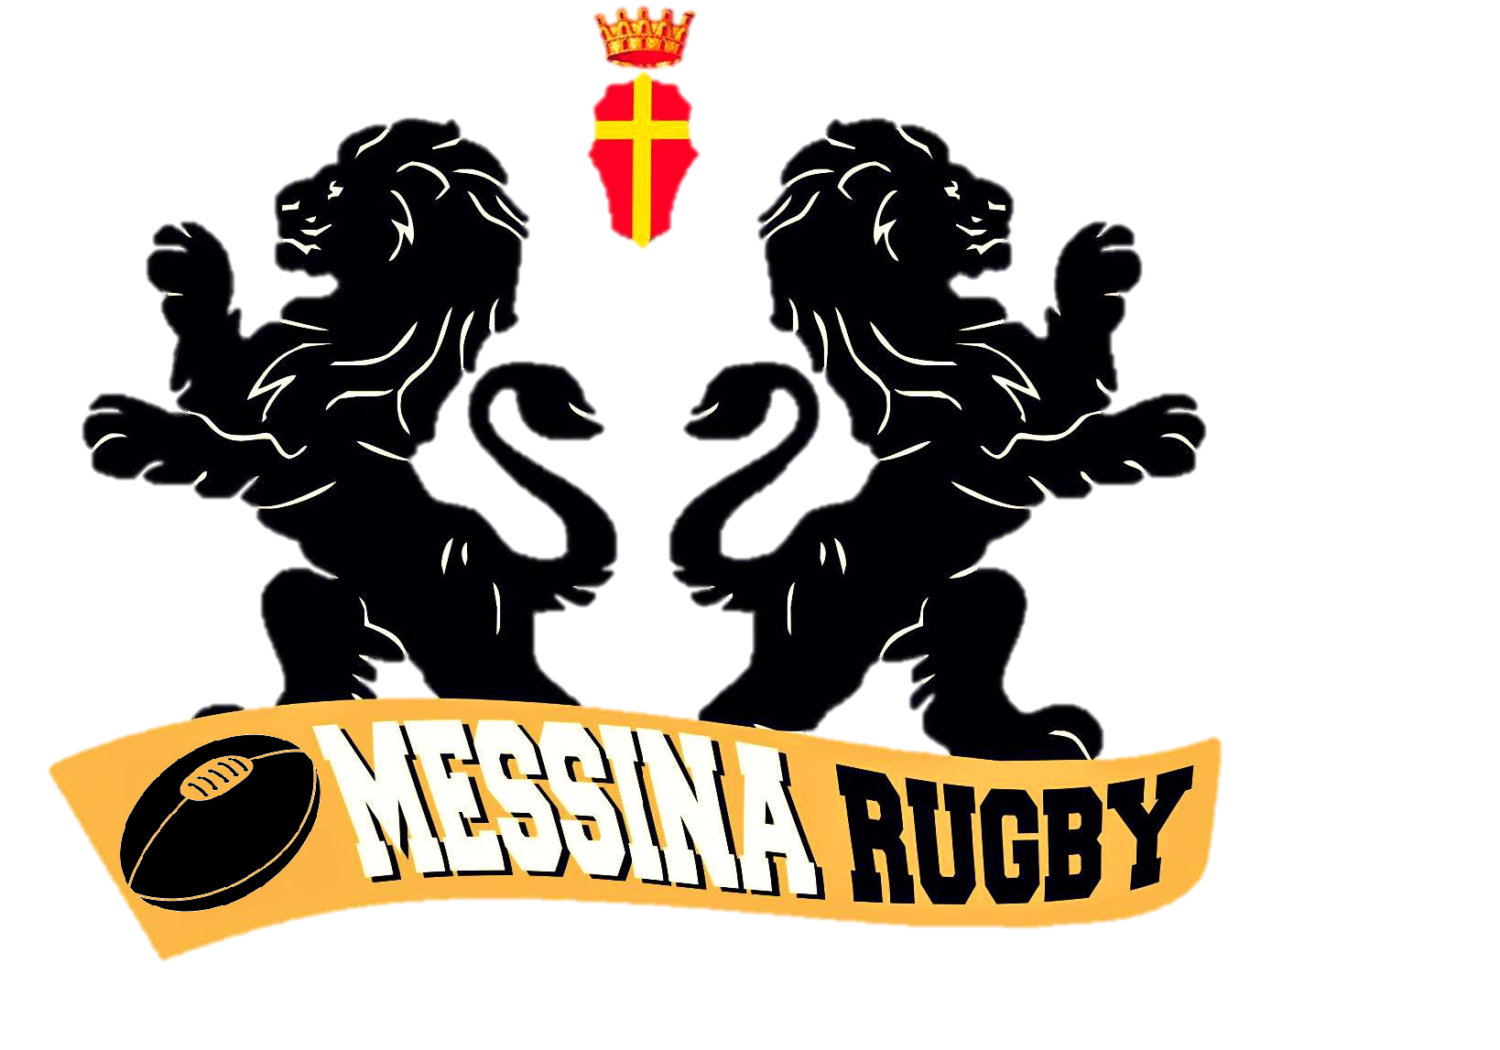    Messina Rugby